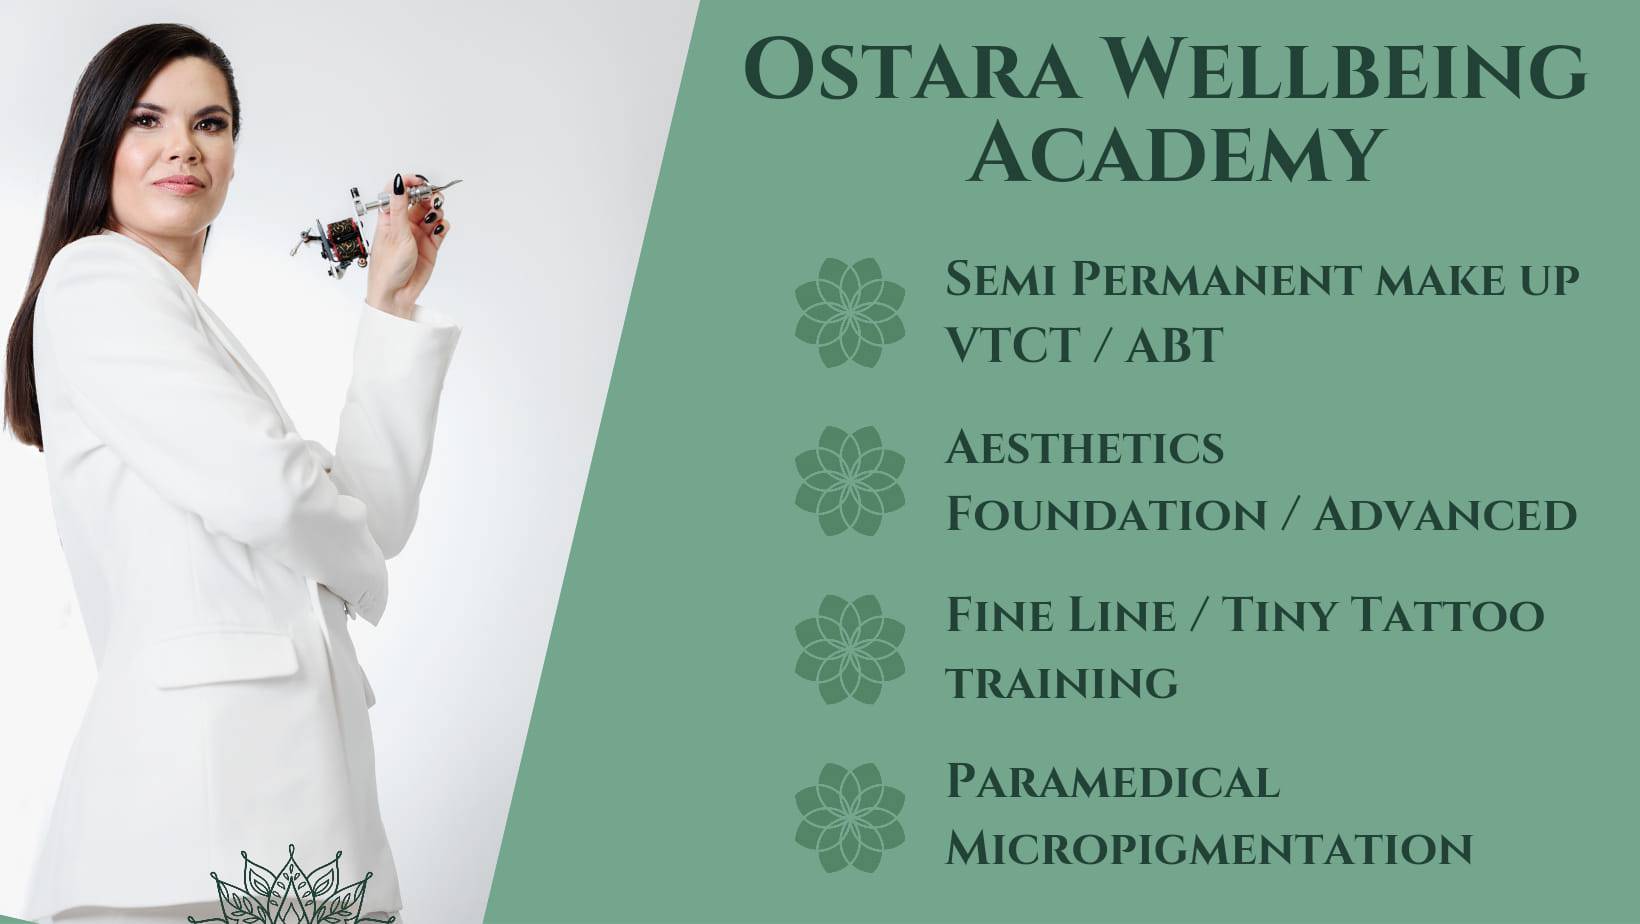 Ostara Wellbeing Academy - Offering the UK's First RQF regulated Tattoo Artistry Qualification